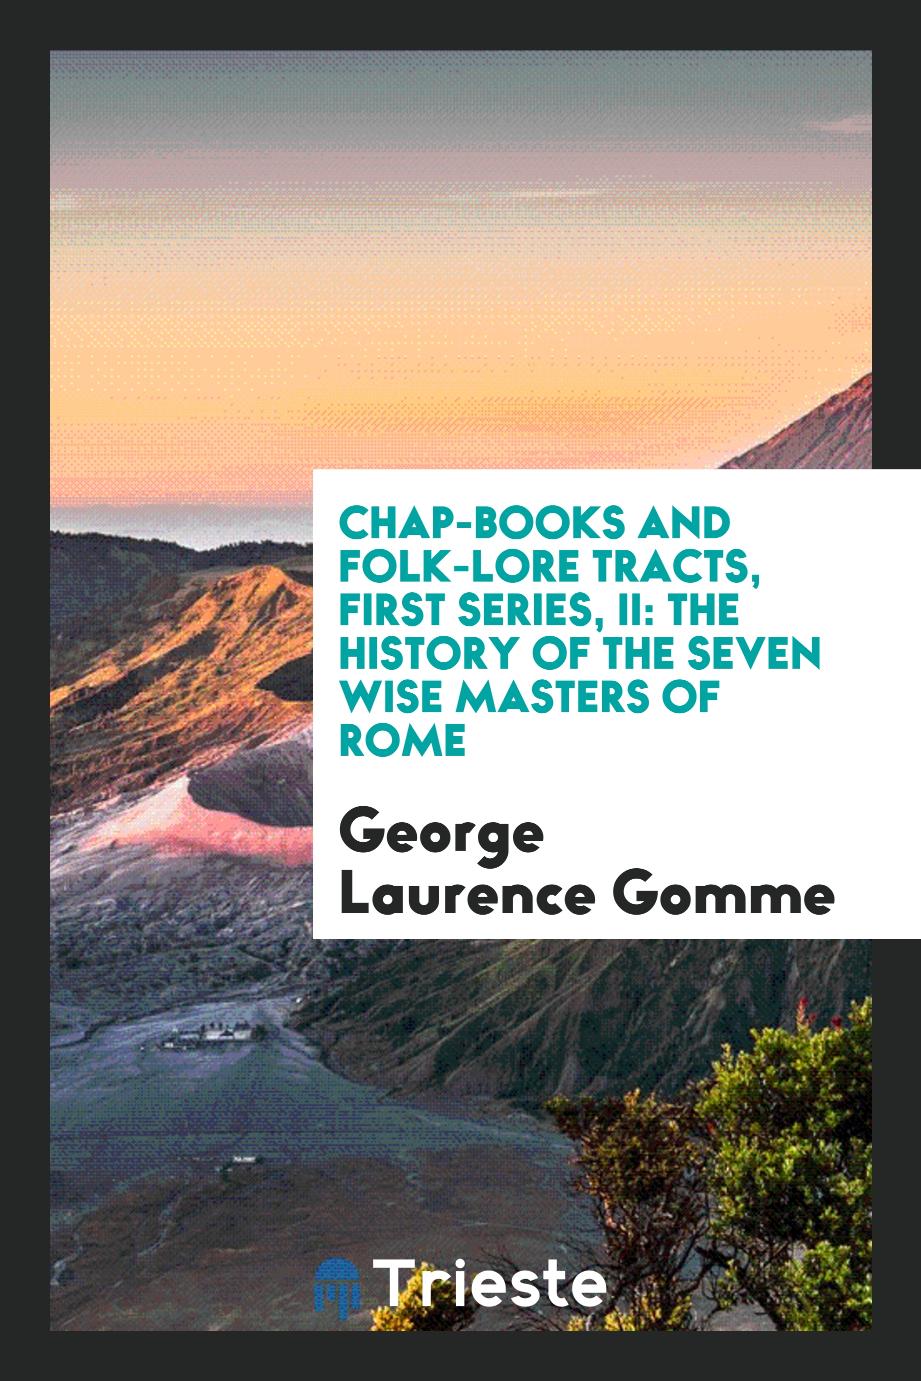 Chap-books and folk-lore tracts, first series, II: The history of the seven wise masters of Rome